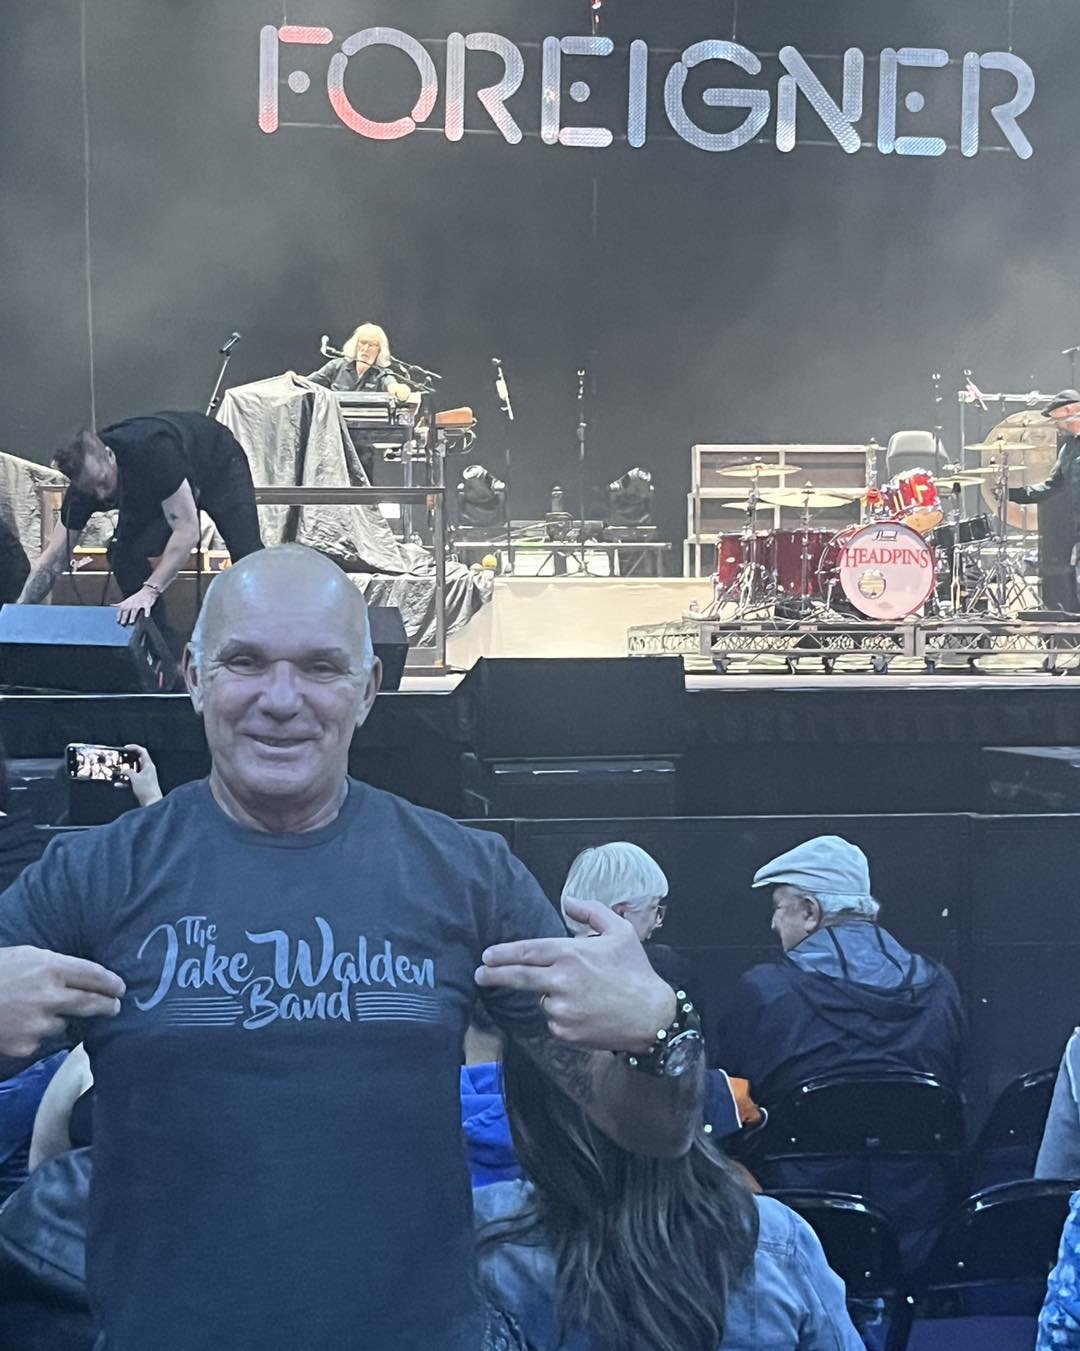 Shout out to our fans in Canada! Repping the JWB at a Foreigner concert. #foreigner #canada #fans #merch #bandtee #bluesrock